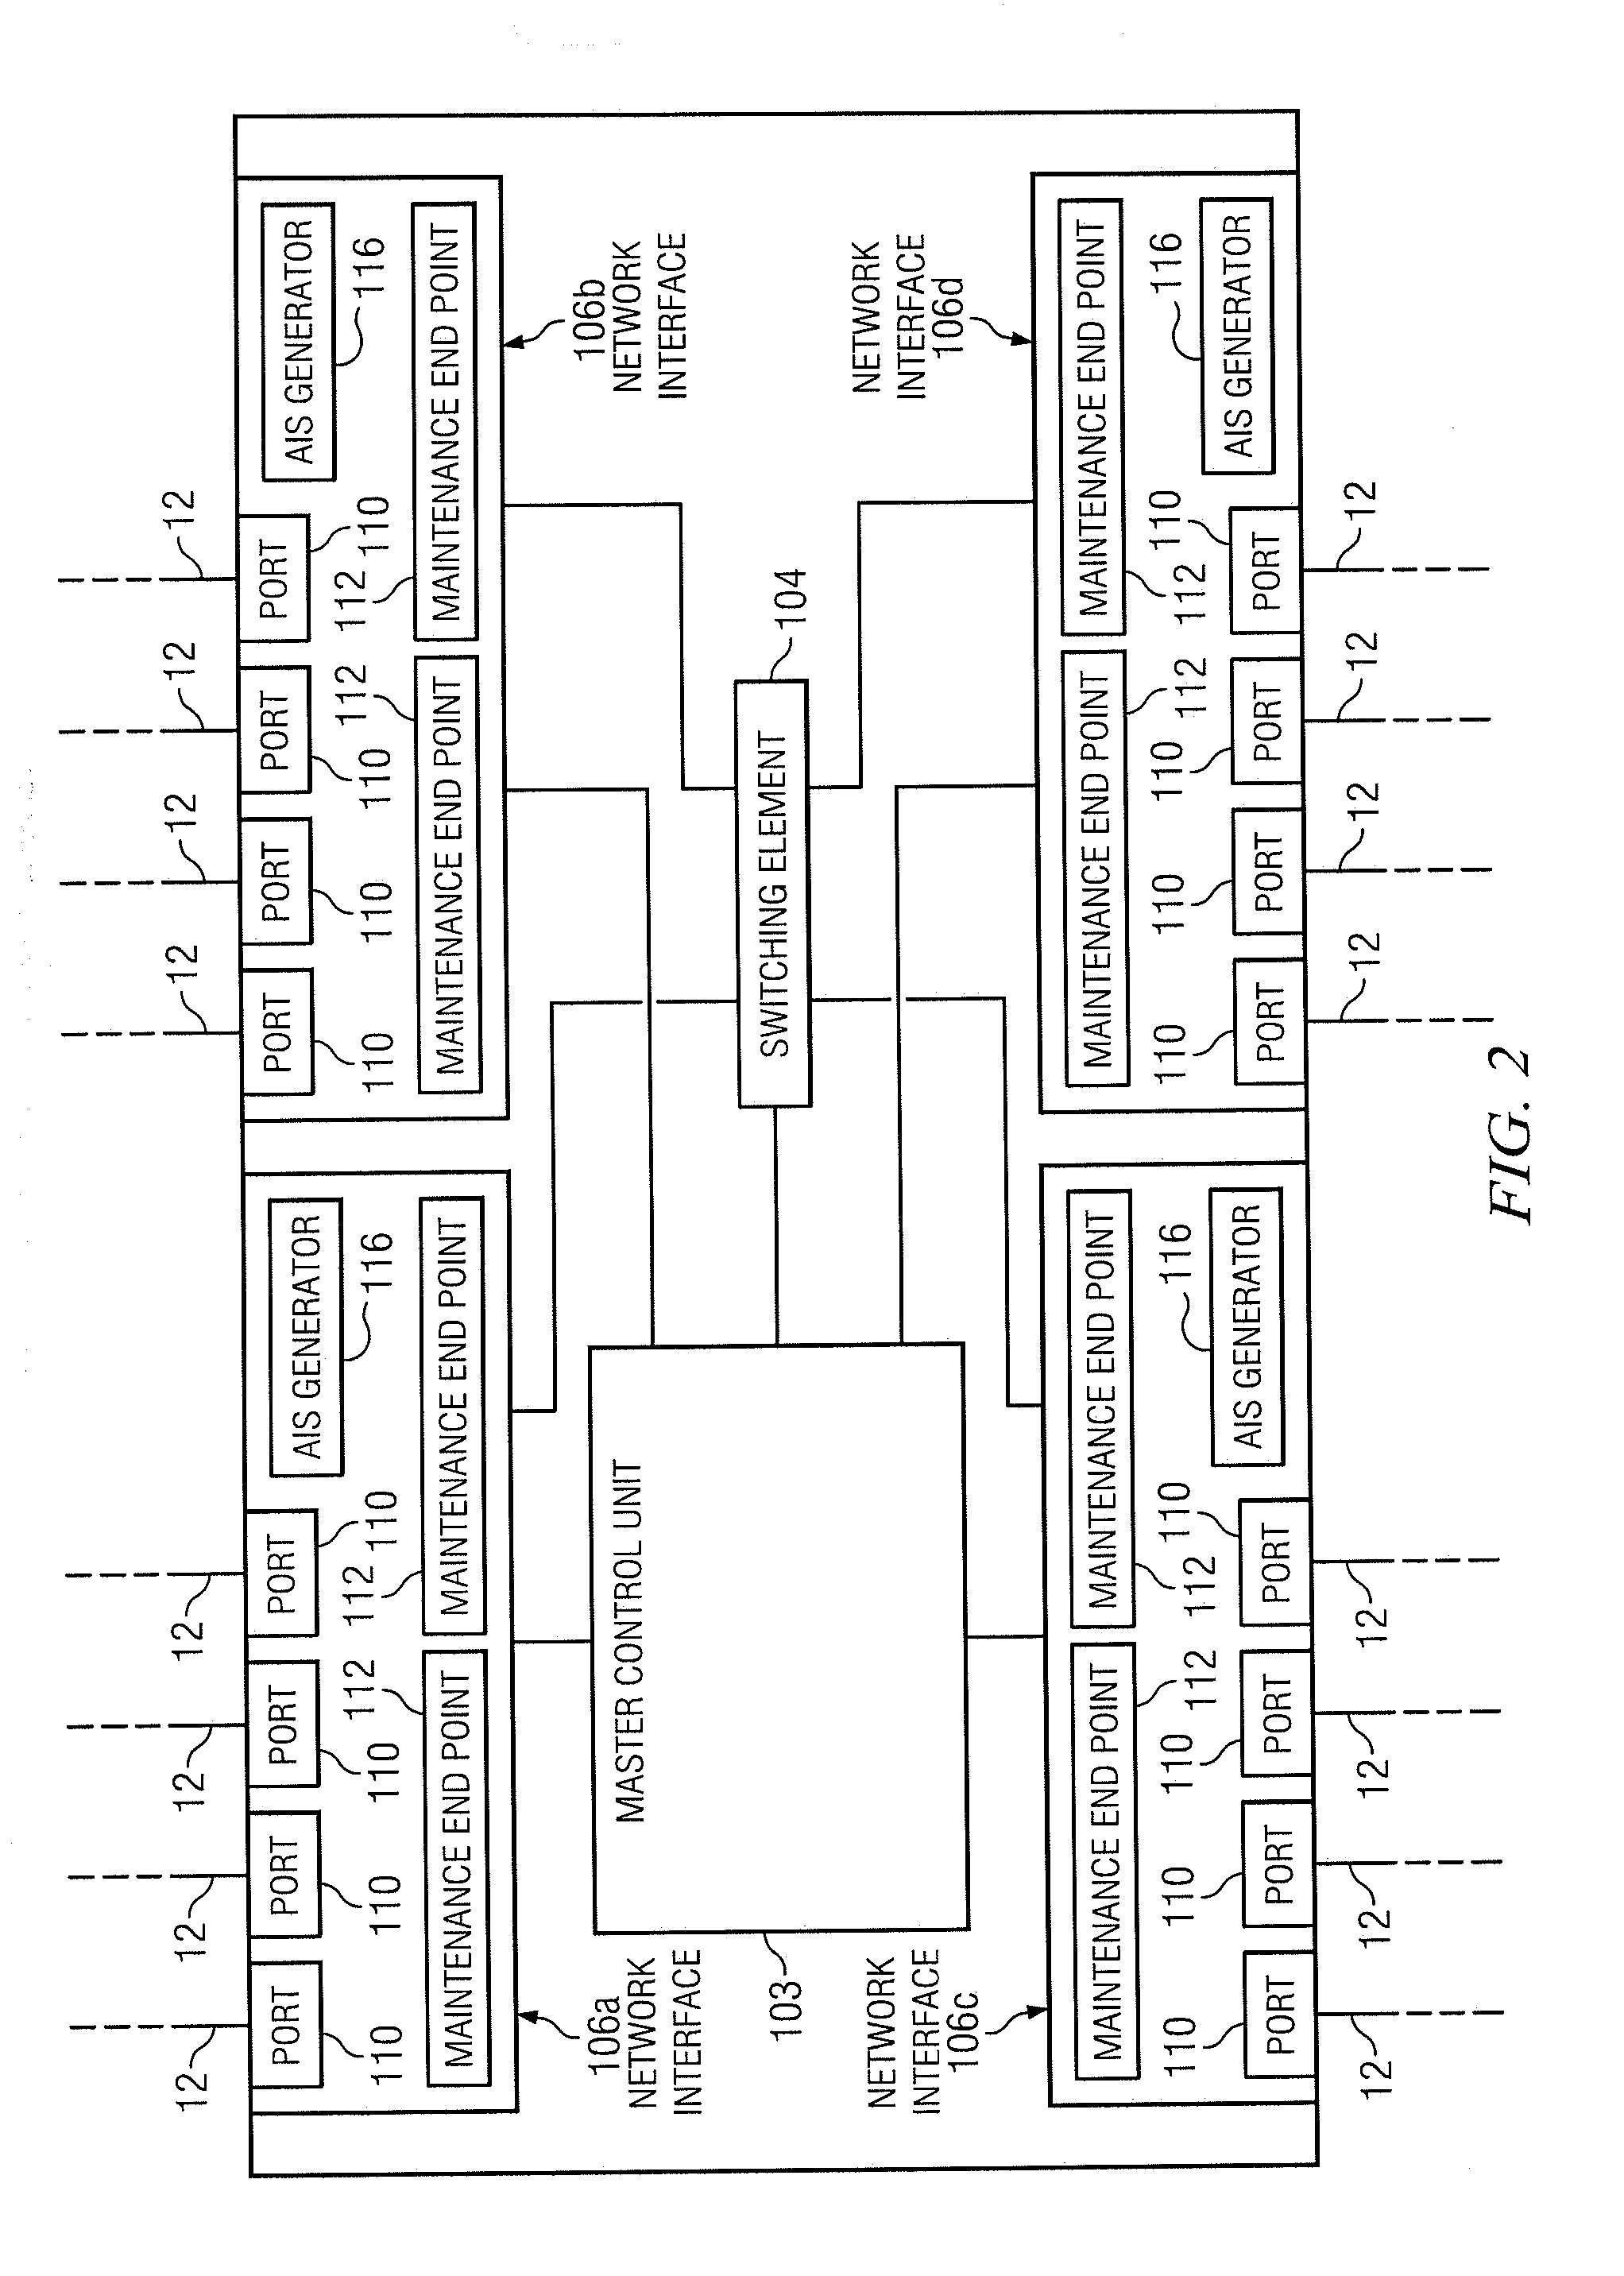 Systems and Methods for Transmission of Trigger-Based Alarm Indication Suppression Messages